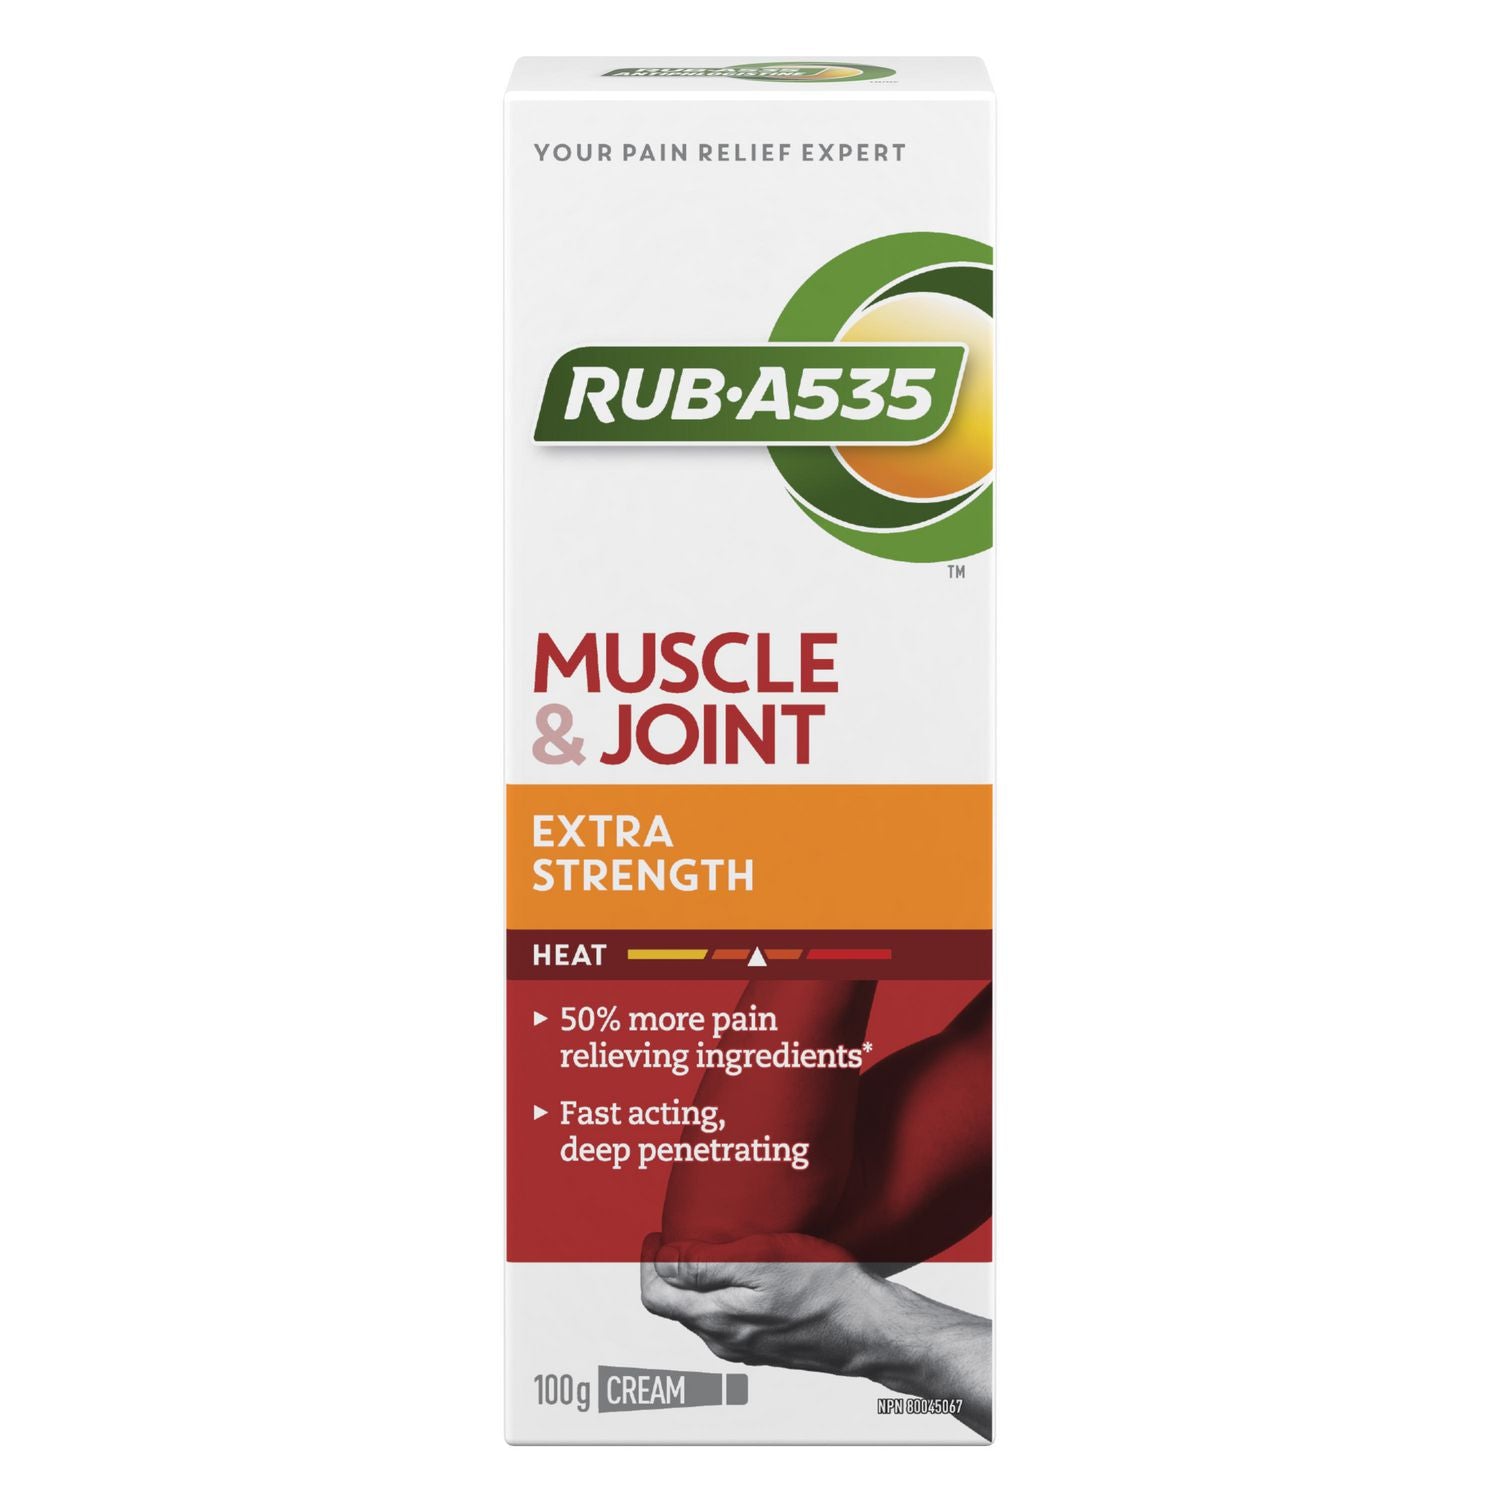 Rub-A535  Muscle & Joint Extra Strength Cream 100g